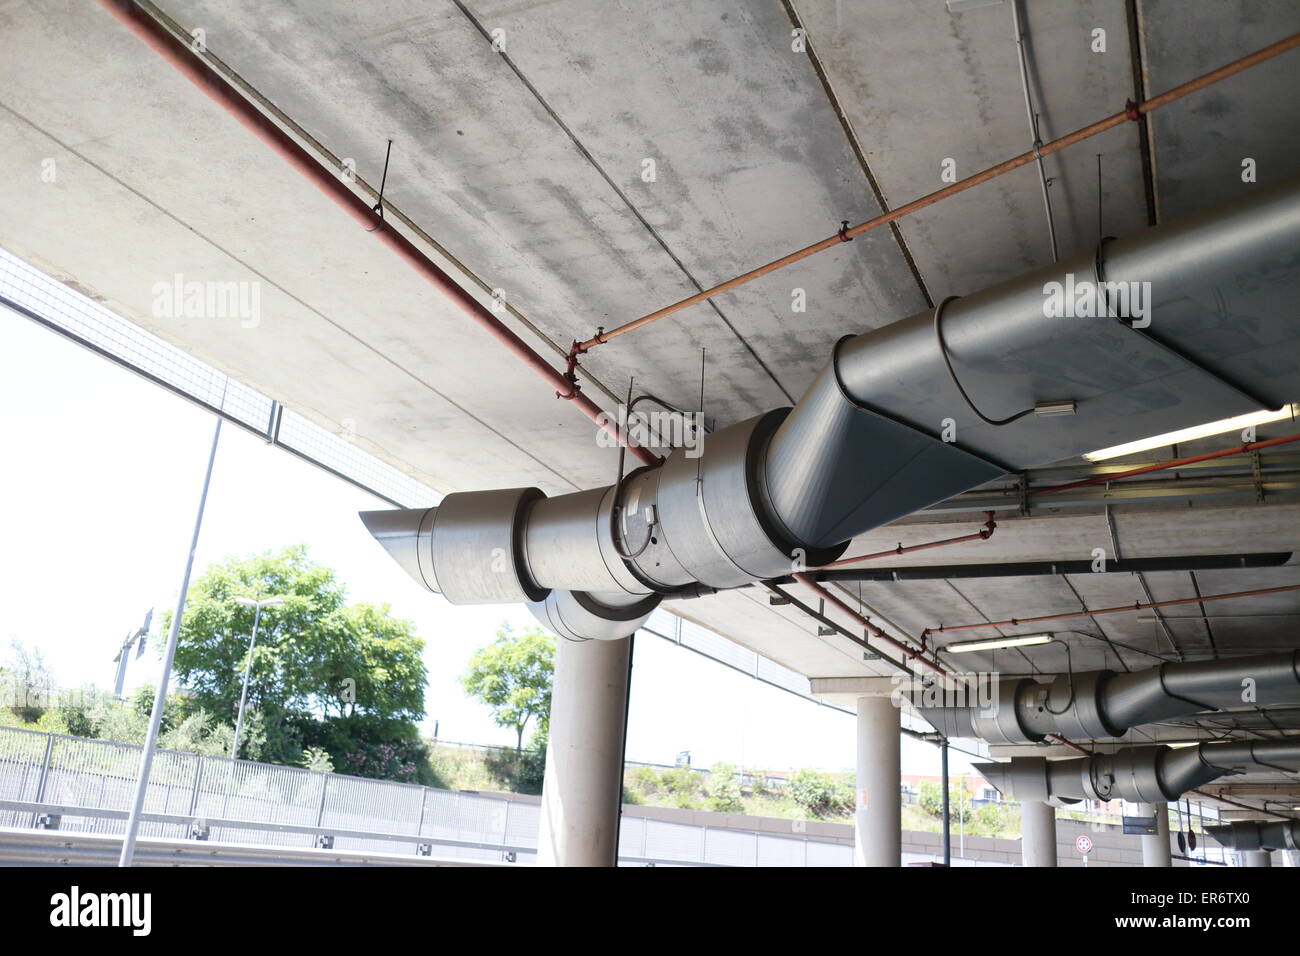 Underground park of a mall with columns and ventilation ducts Stock Photo